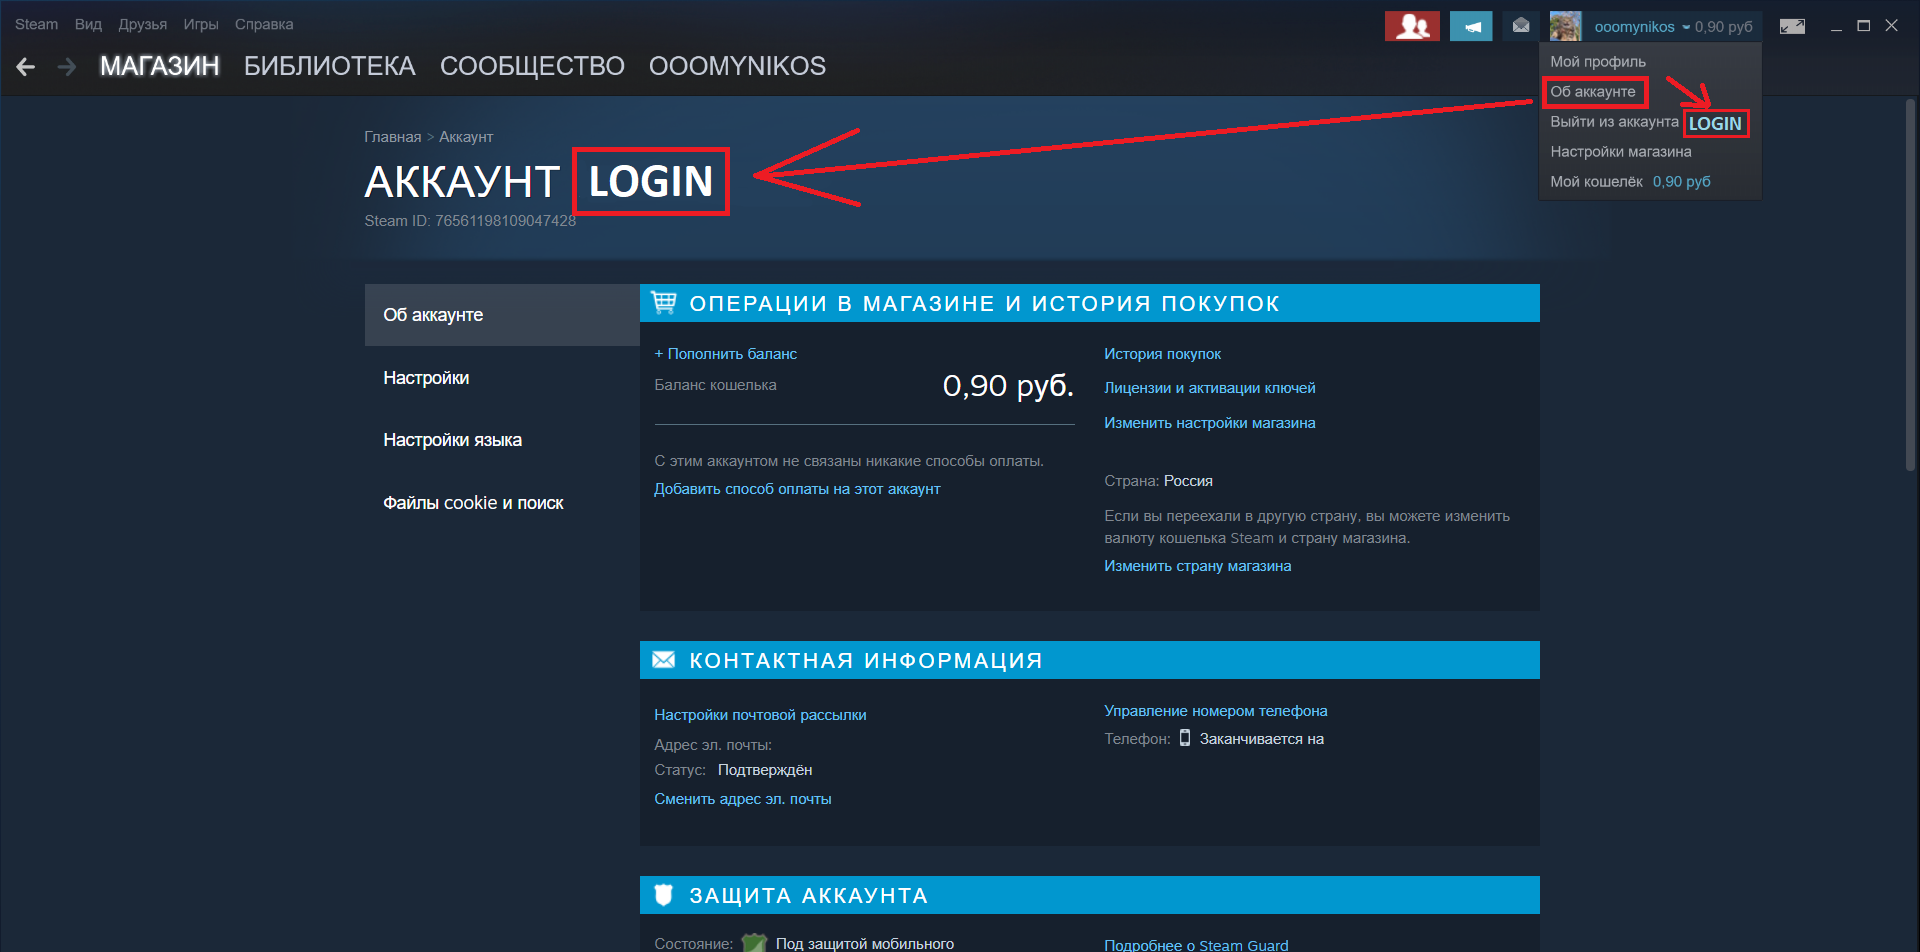 You are not currently logged in to a steam account фото 61